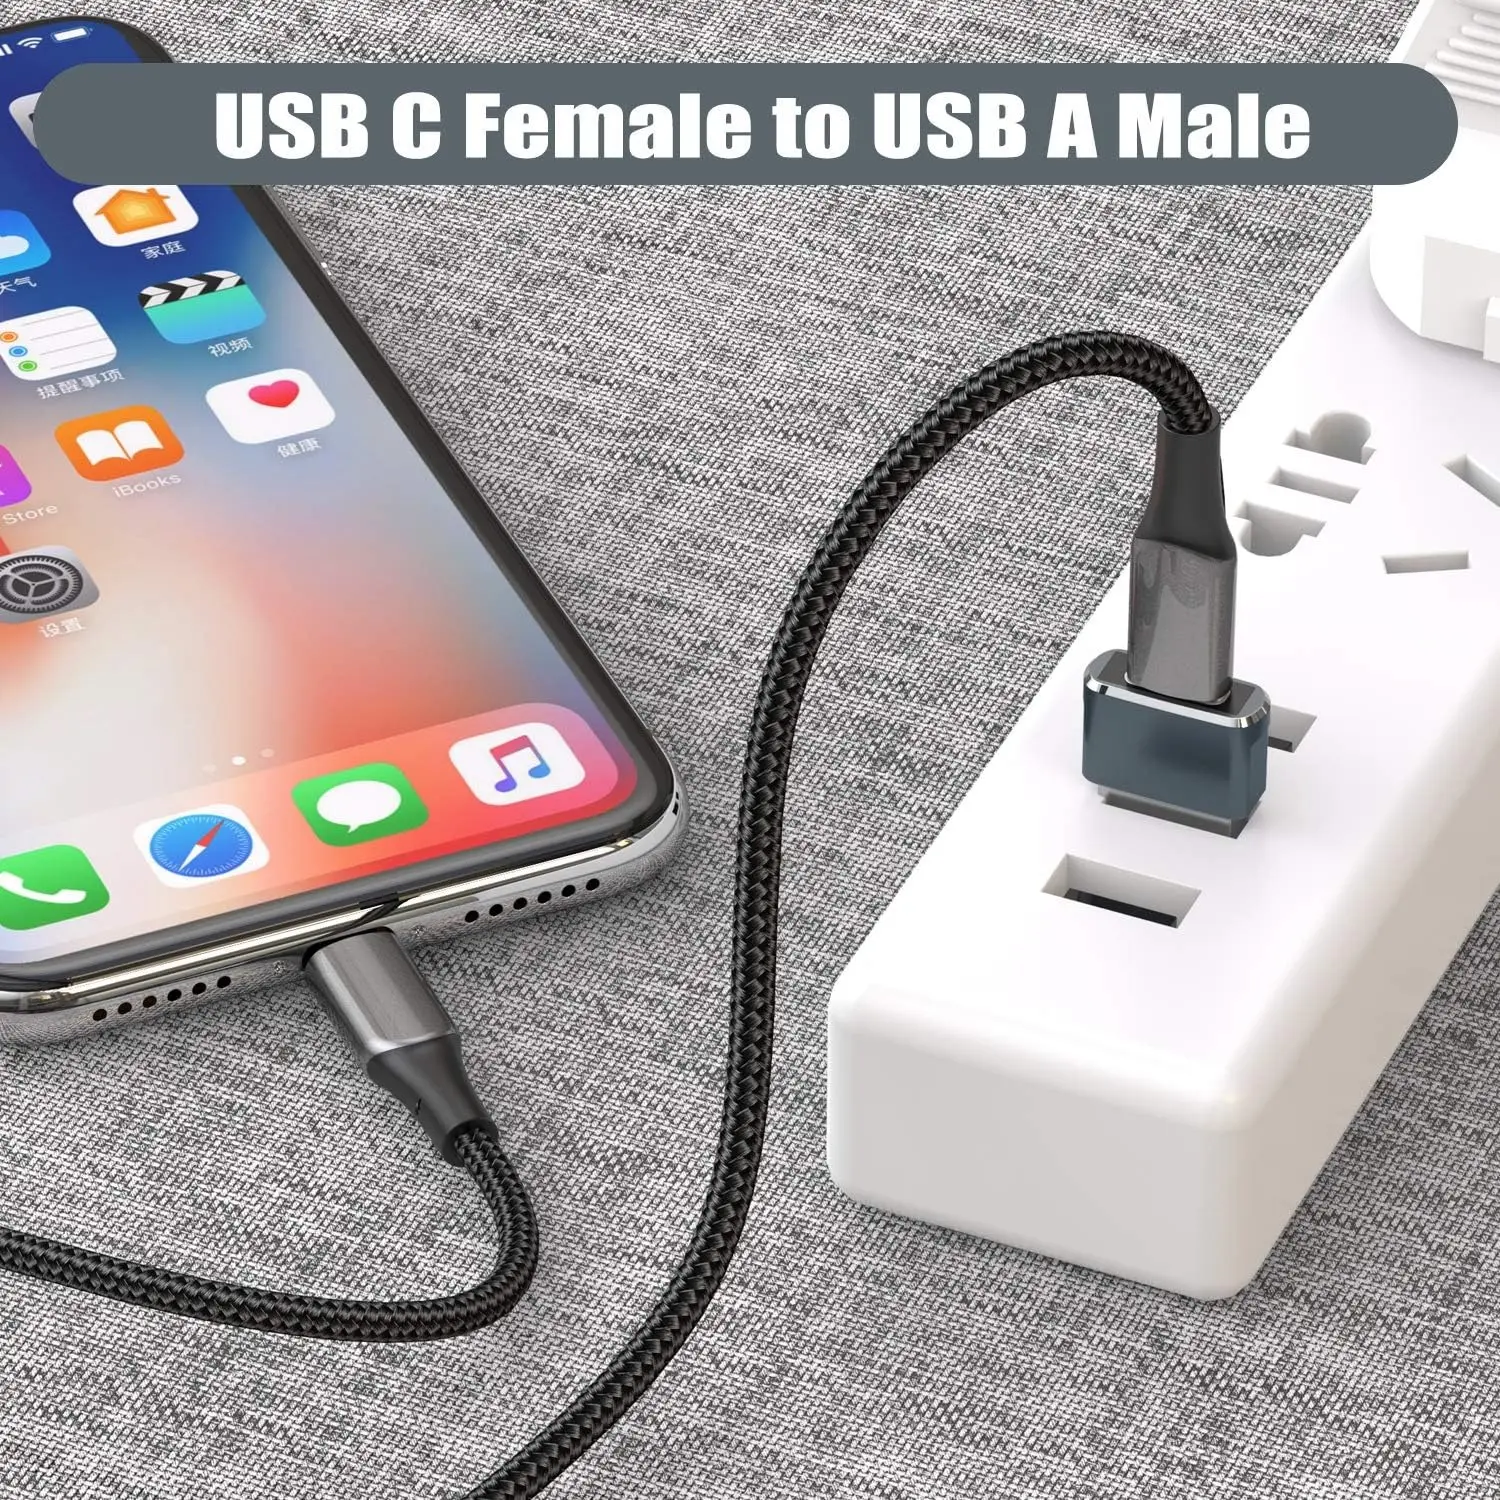 USB to USB C Adapter USB-C Female to A Male OTG Charger Type C Converter for Smartwatches Phones Tablets and More